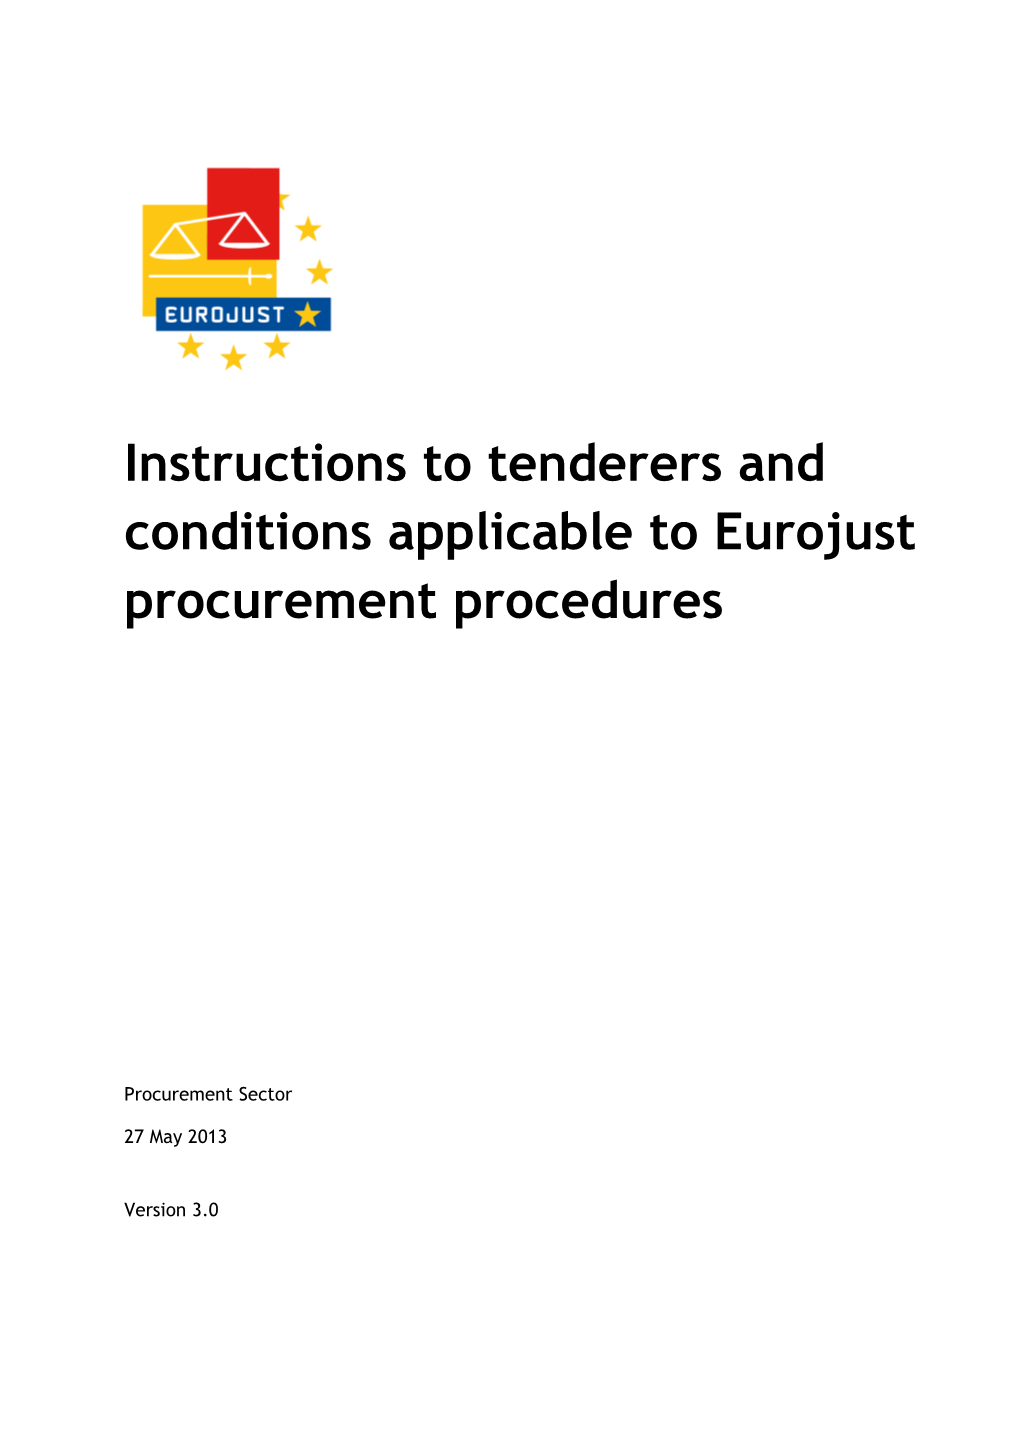 Instructions to Tenderers and Conditions Applicable to Eurojust Procurement Procedures